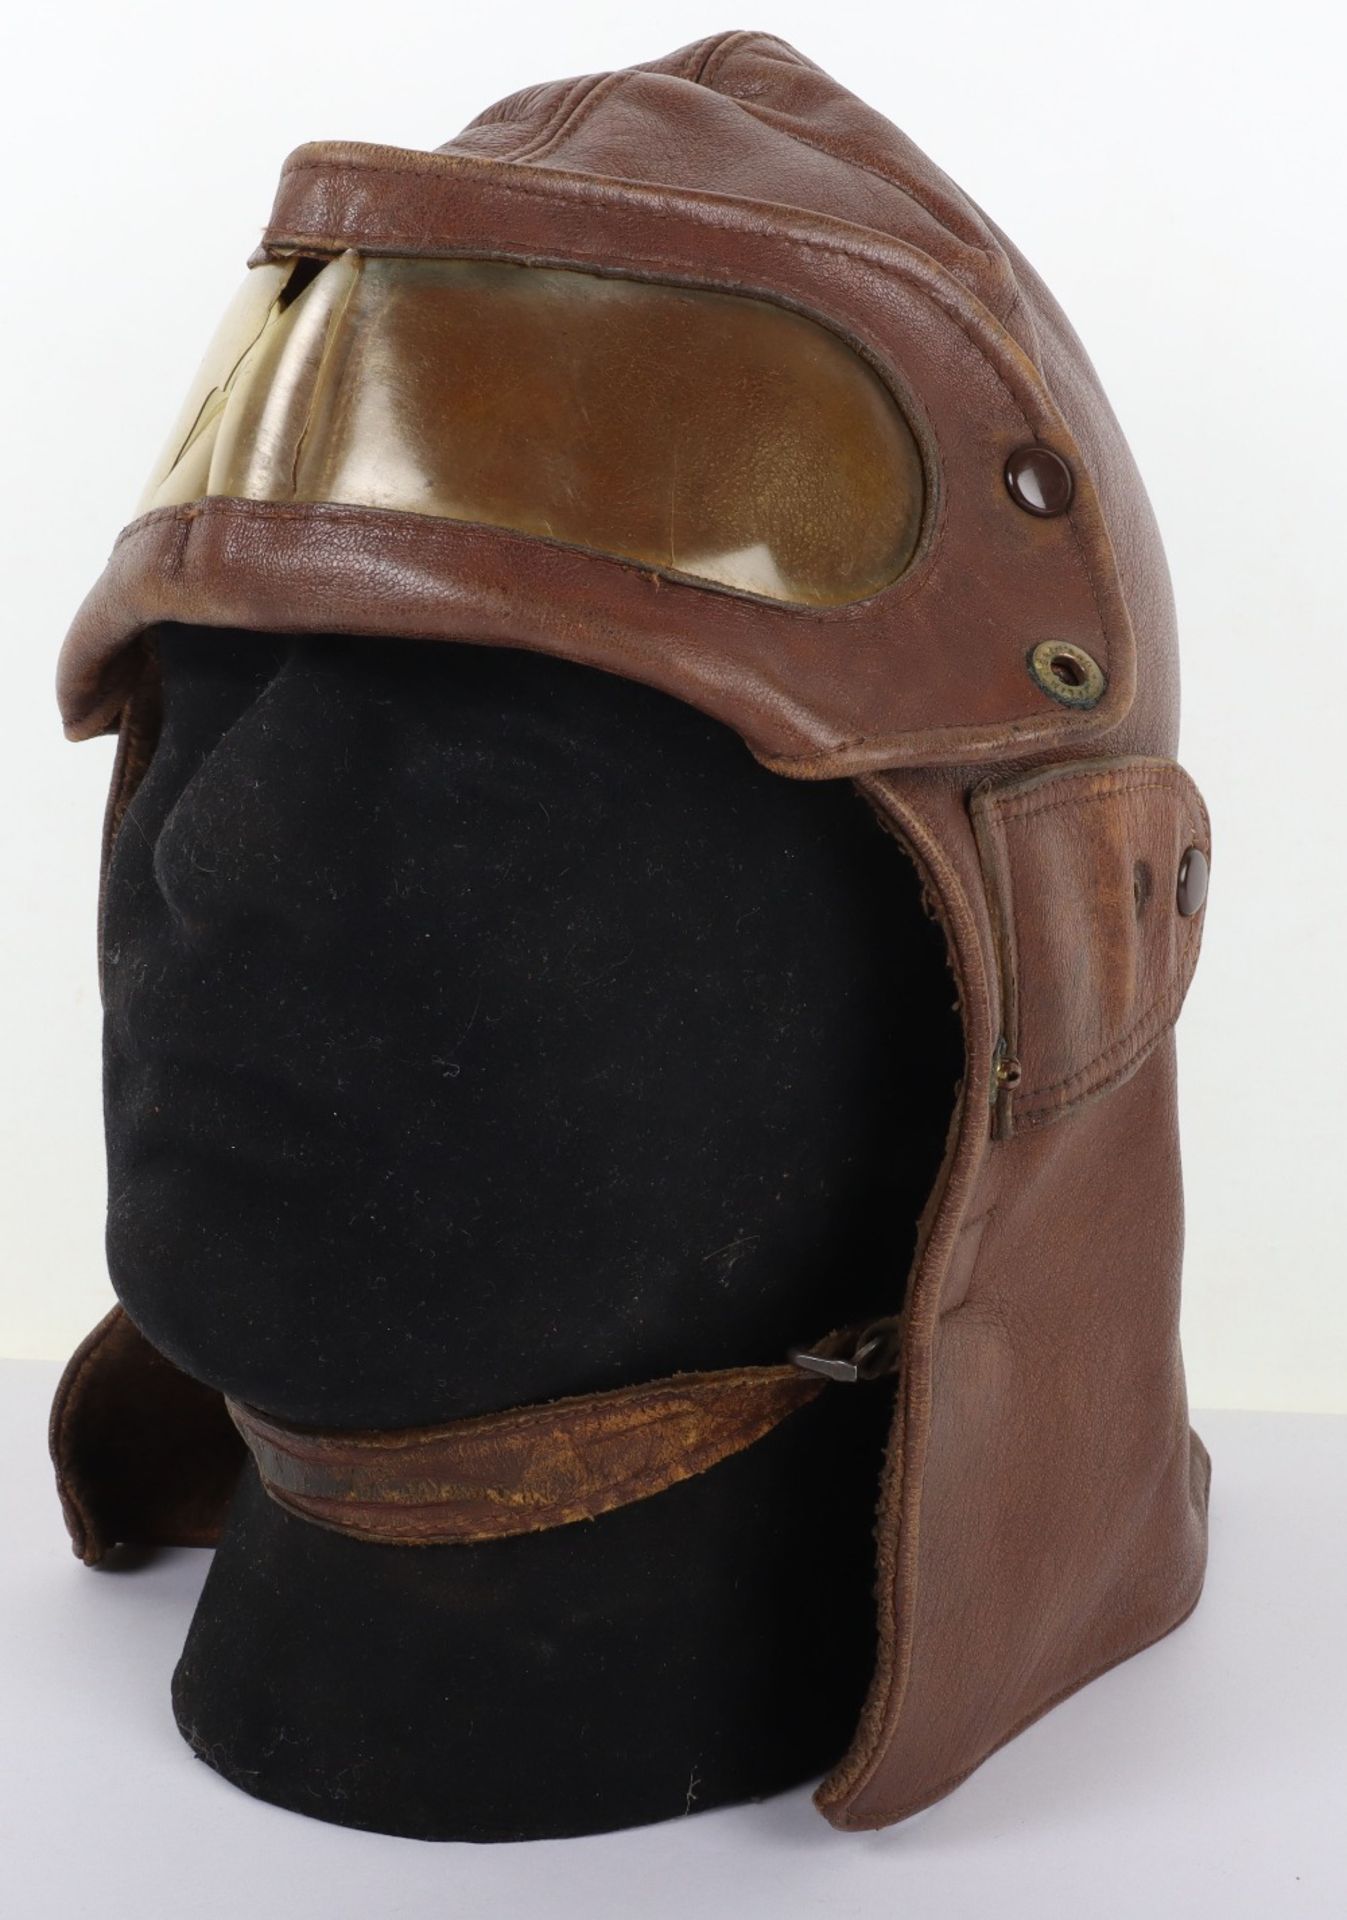 One Piece Leather Flying Helmet & Goggles Combination - Image 2 of 10